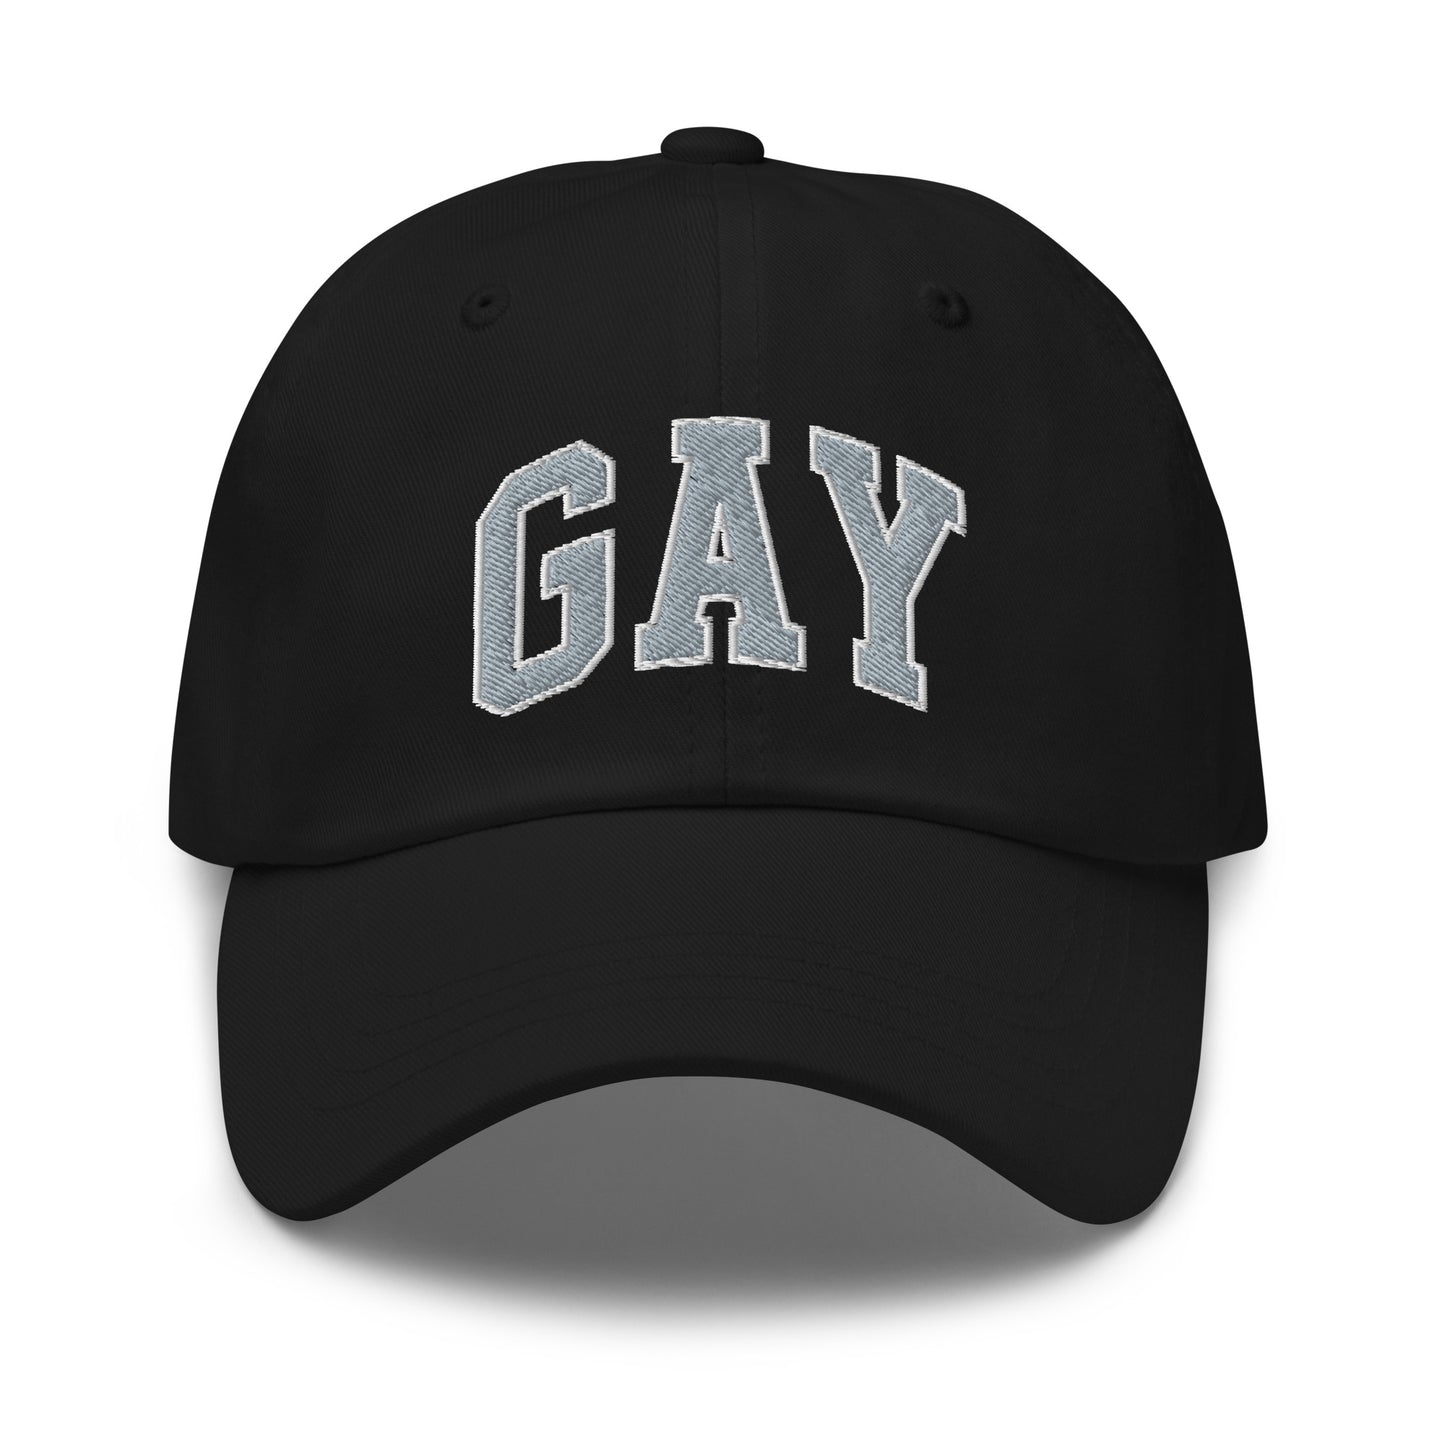 GAY (Embroidered) hat